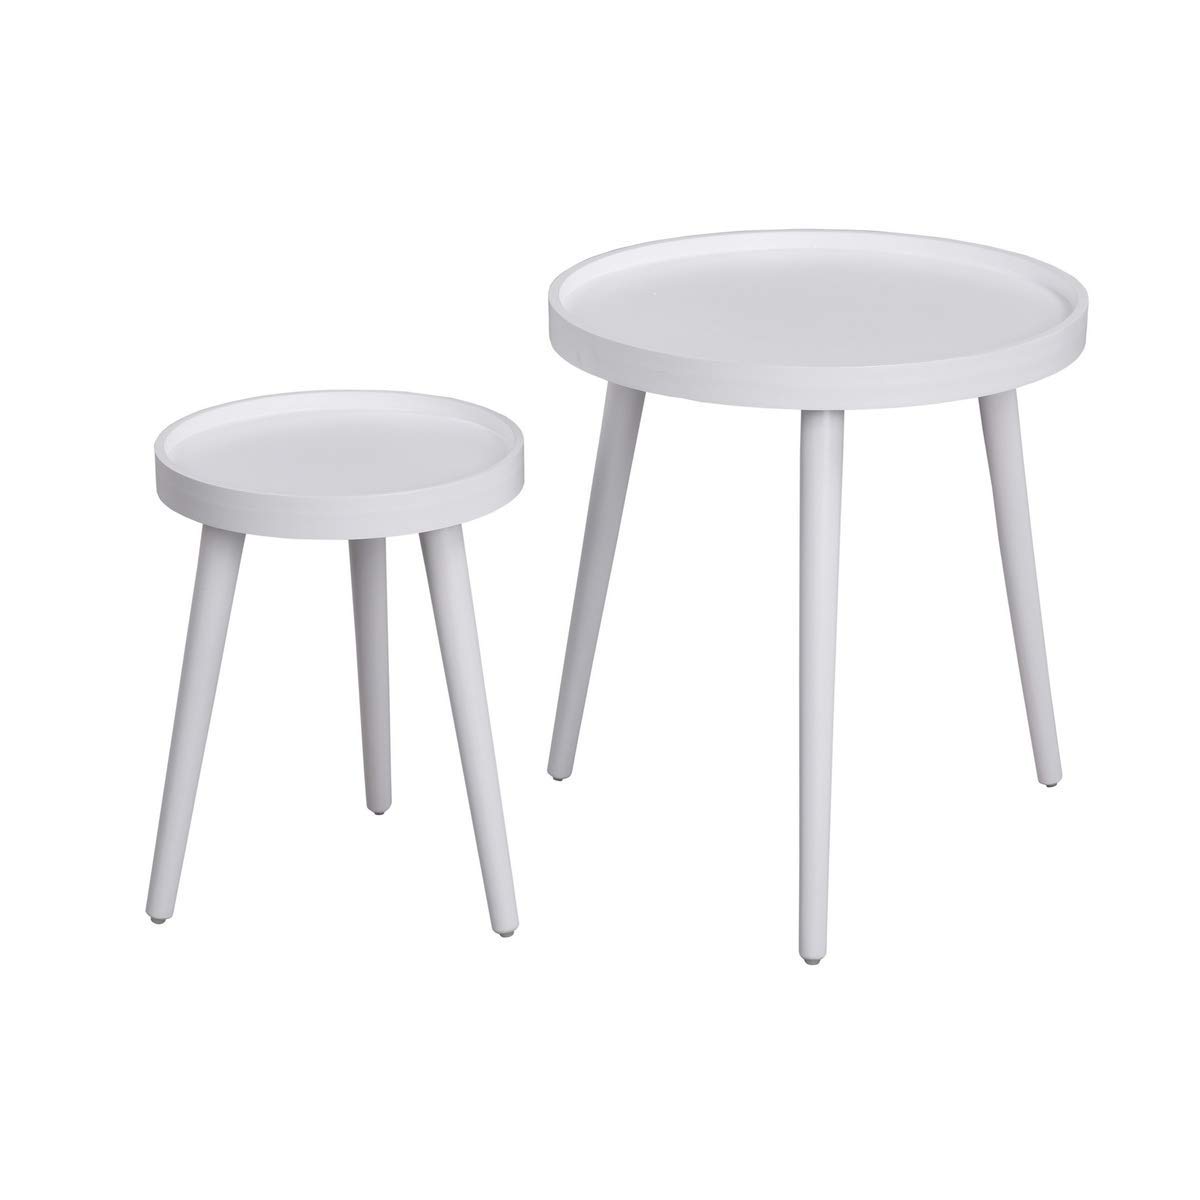 eggree round side table set small coffee outdoor accent white sofa end tables for living room bedroom reception area contemporary furniture design metal patio with umbrella hole